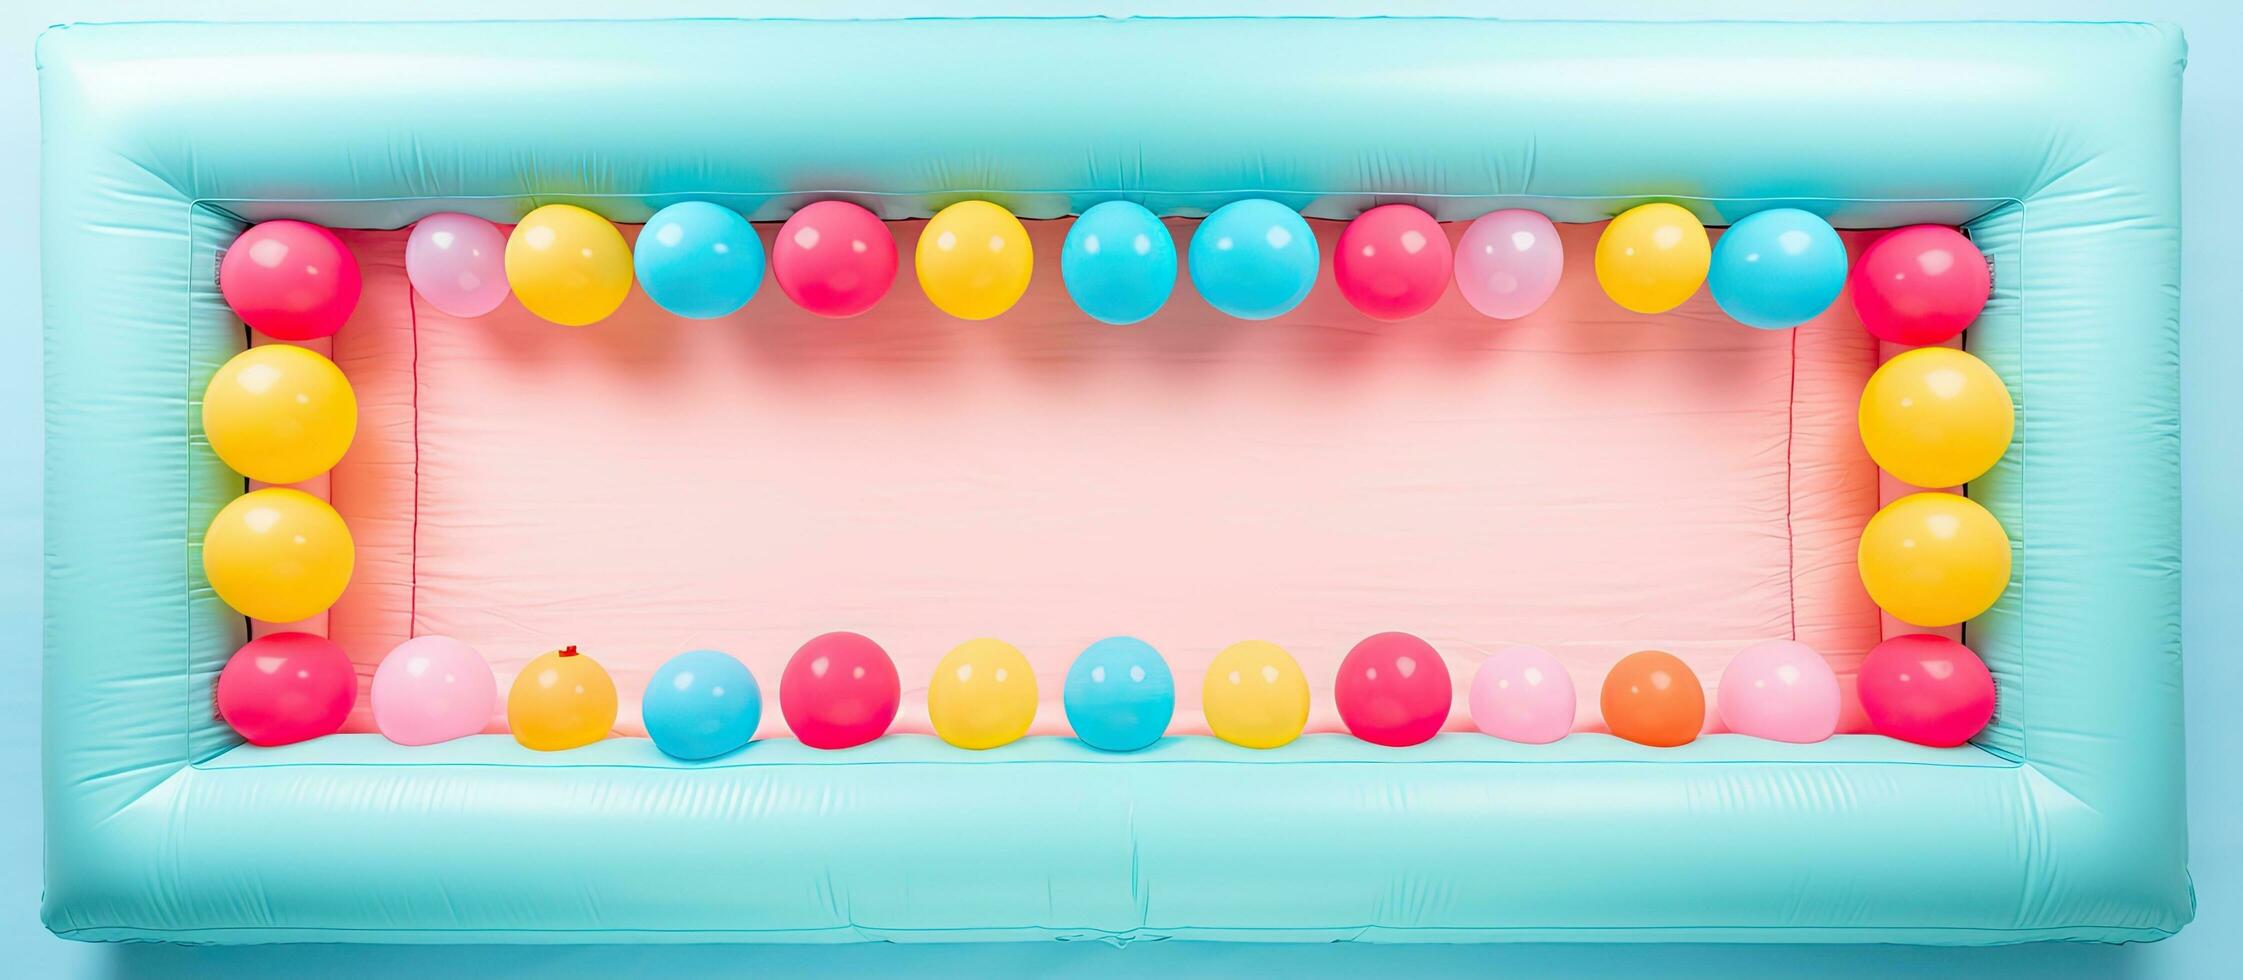 Photo of a balloon frame with colorful balloons floating on it against a clear blue sky with copy space